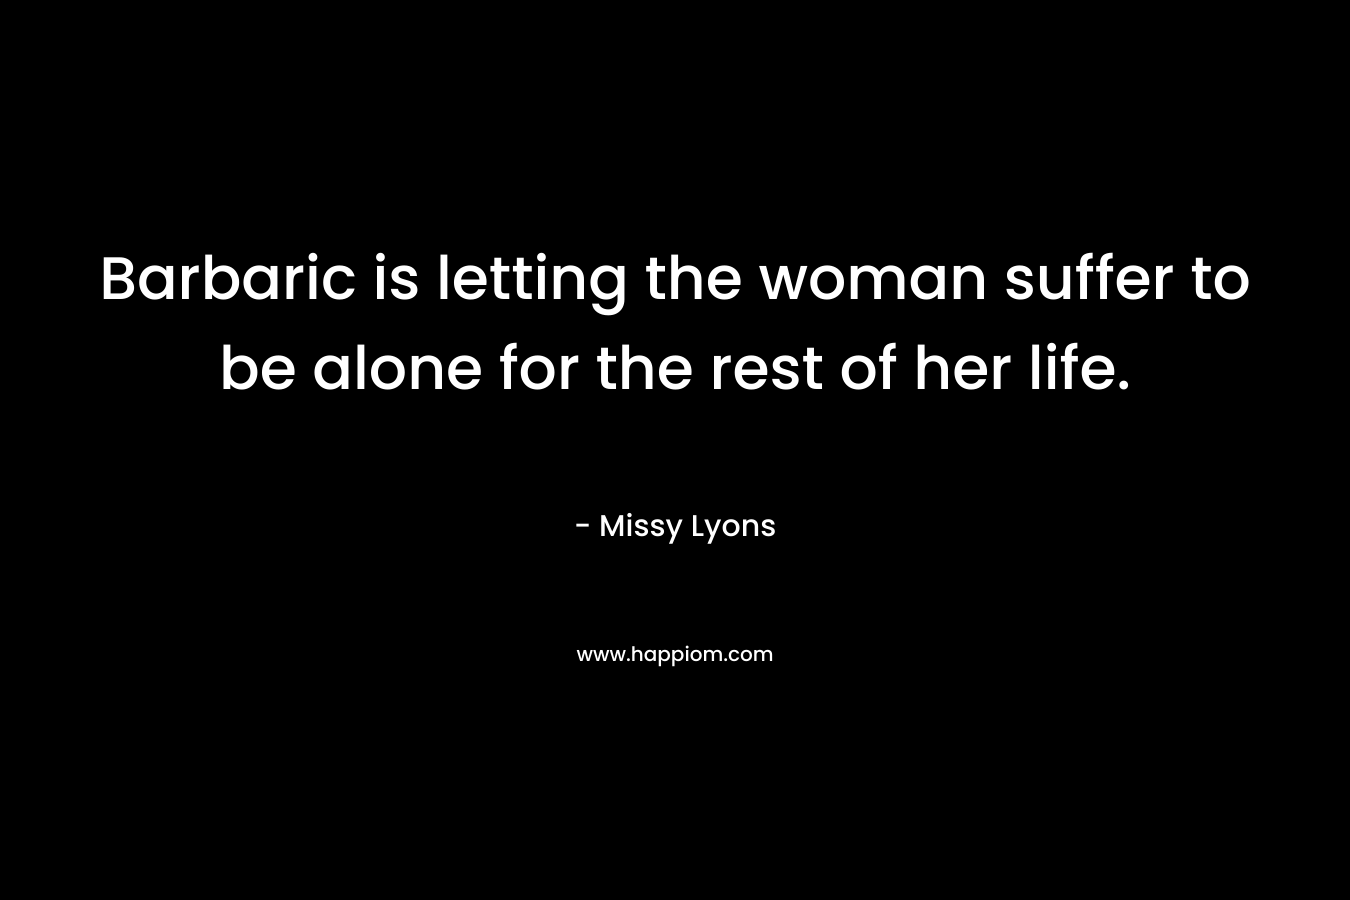 Barbaric is letting the woman suffer to be alone for the rest of her life.